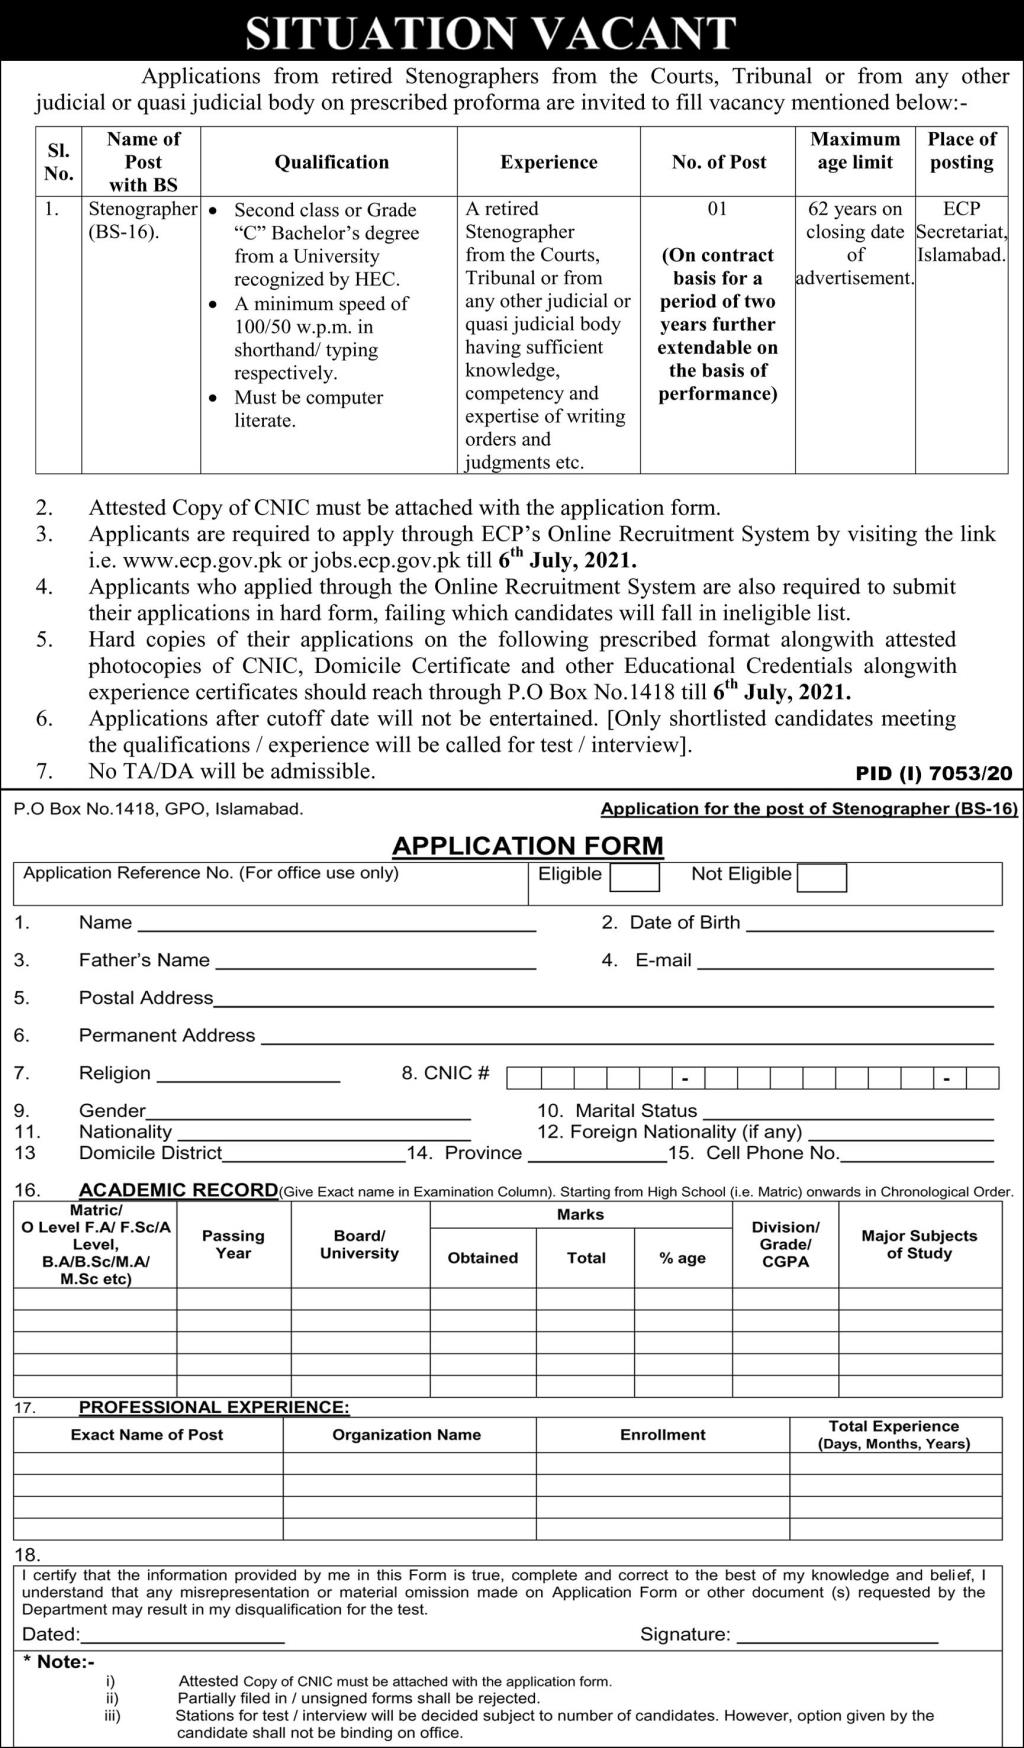 Elections Commission Of Pakistan Jobs 2021 Islamabad For Stenographer